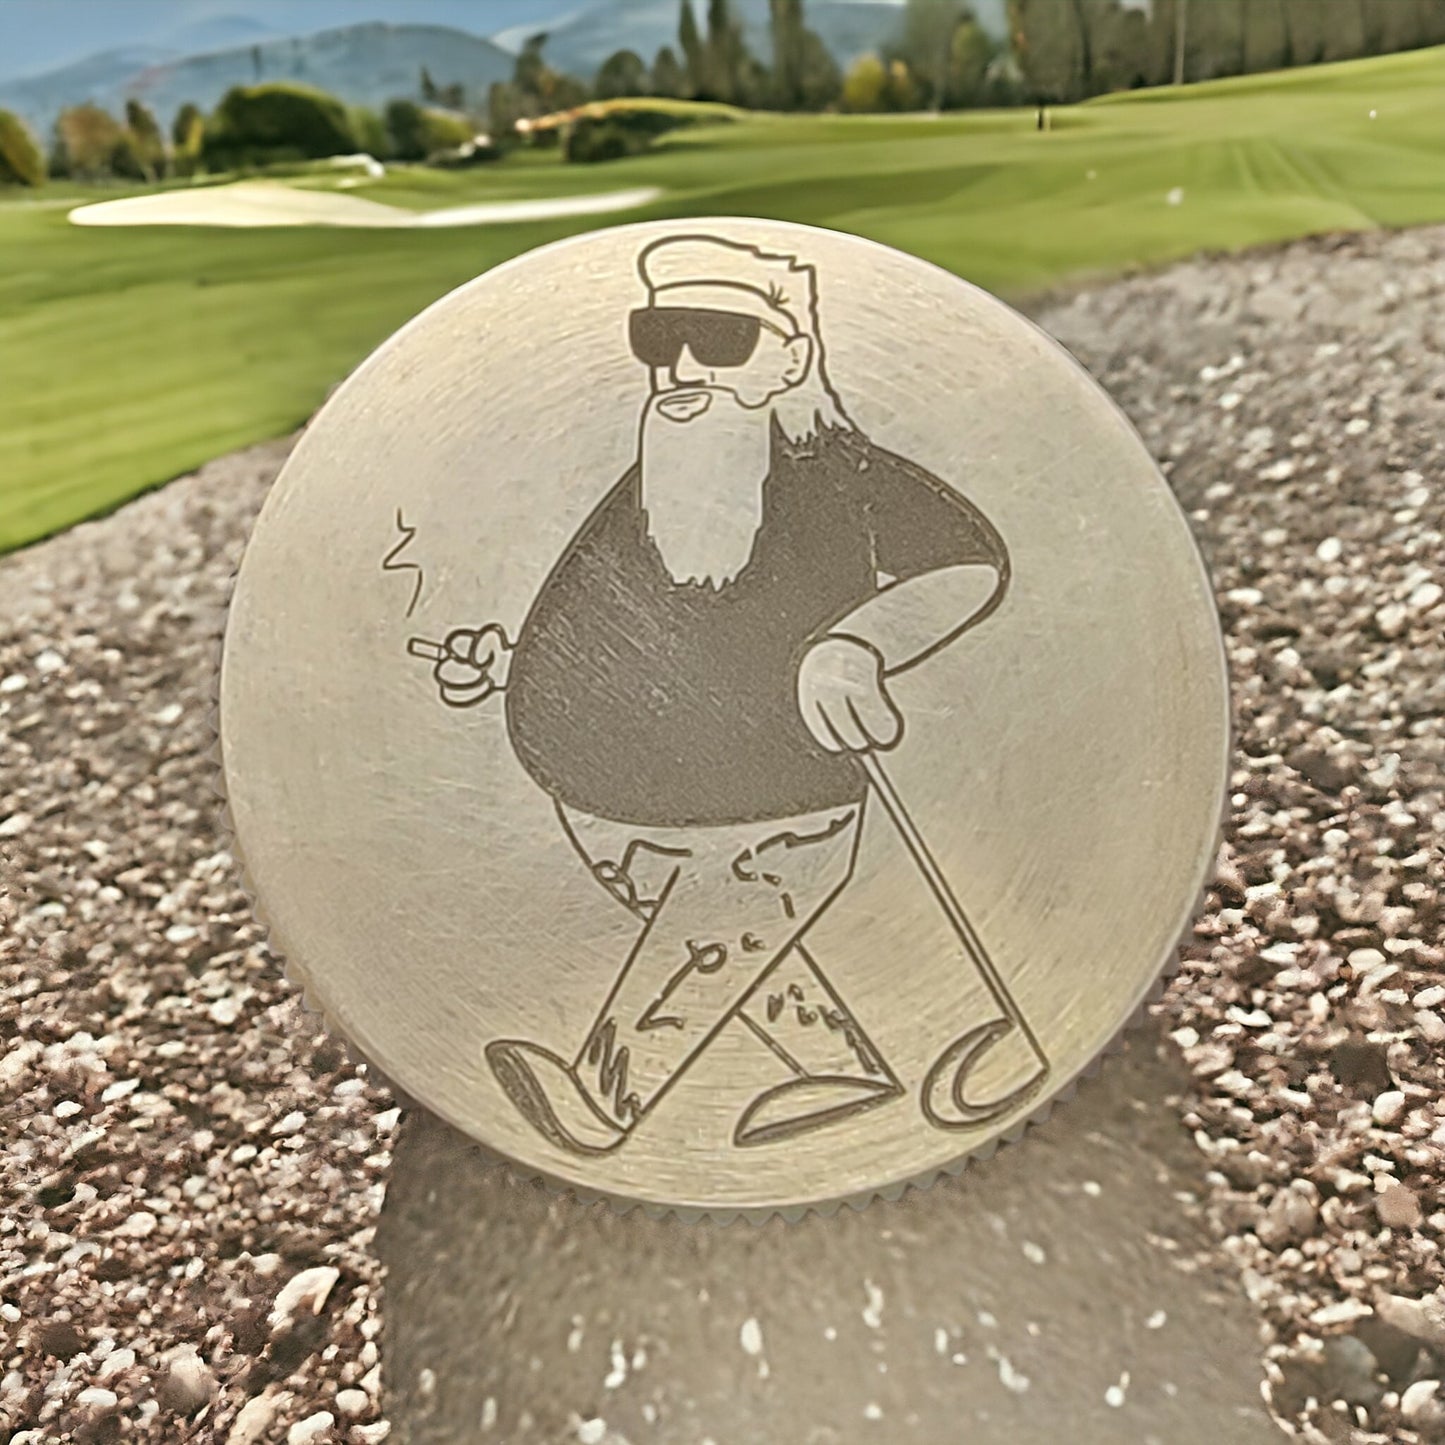 The "JD" CNC Machined Laser Engraved Solid Brass Golf Ball Marker - River Valley Laser Works